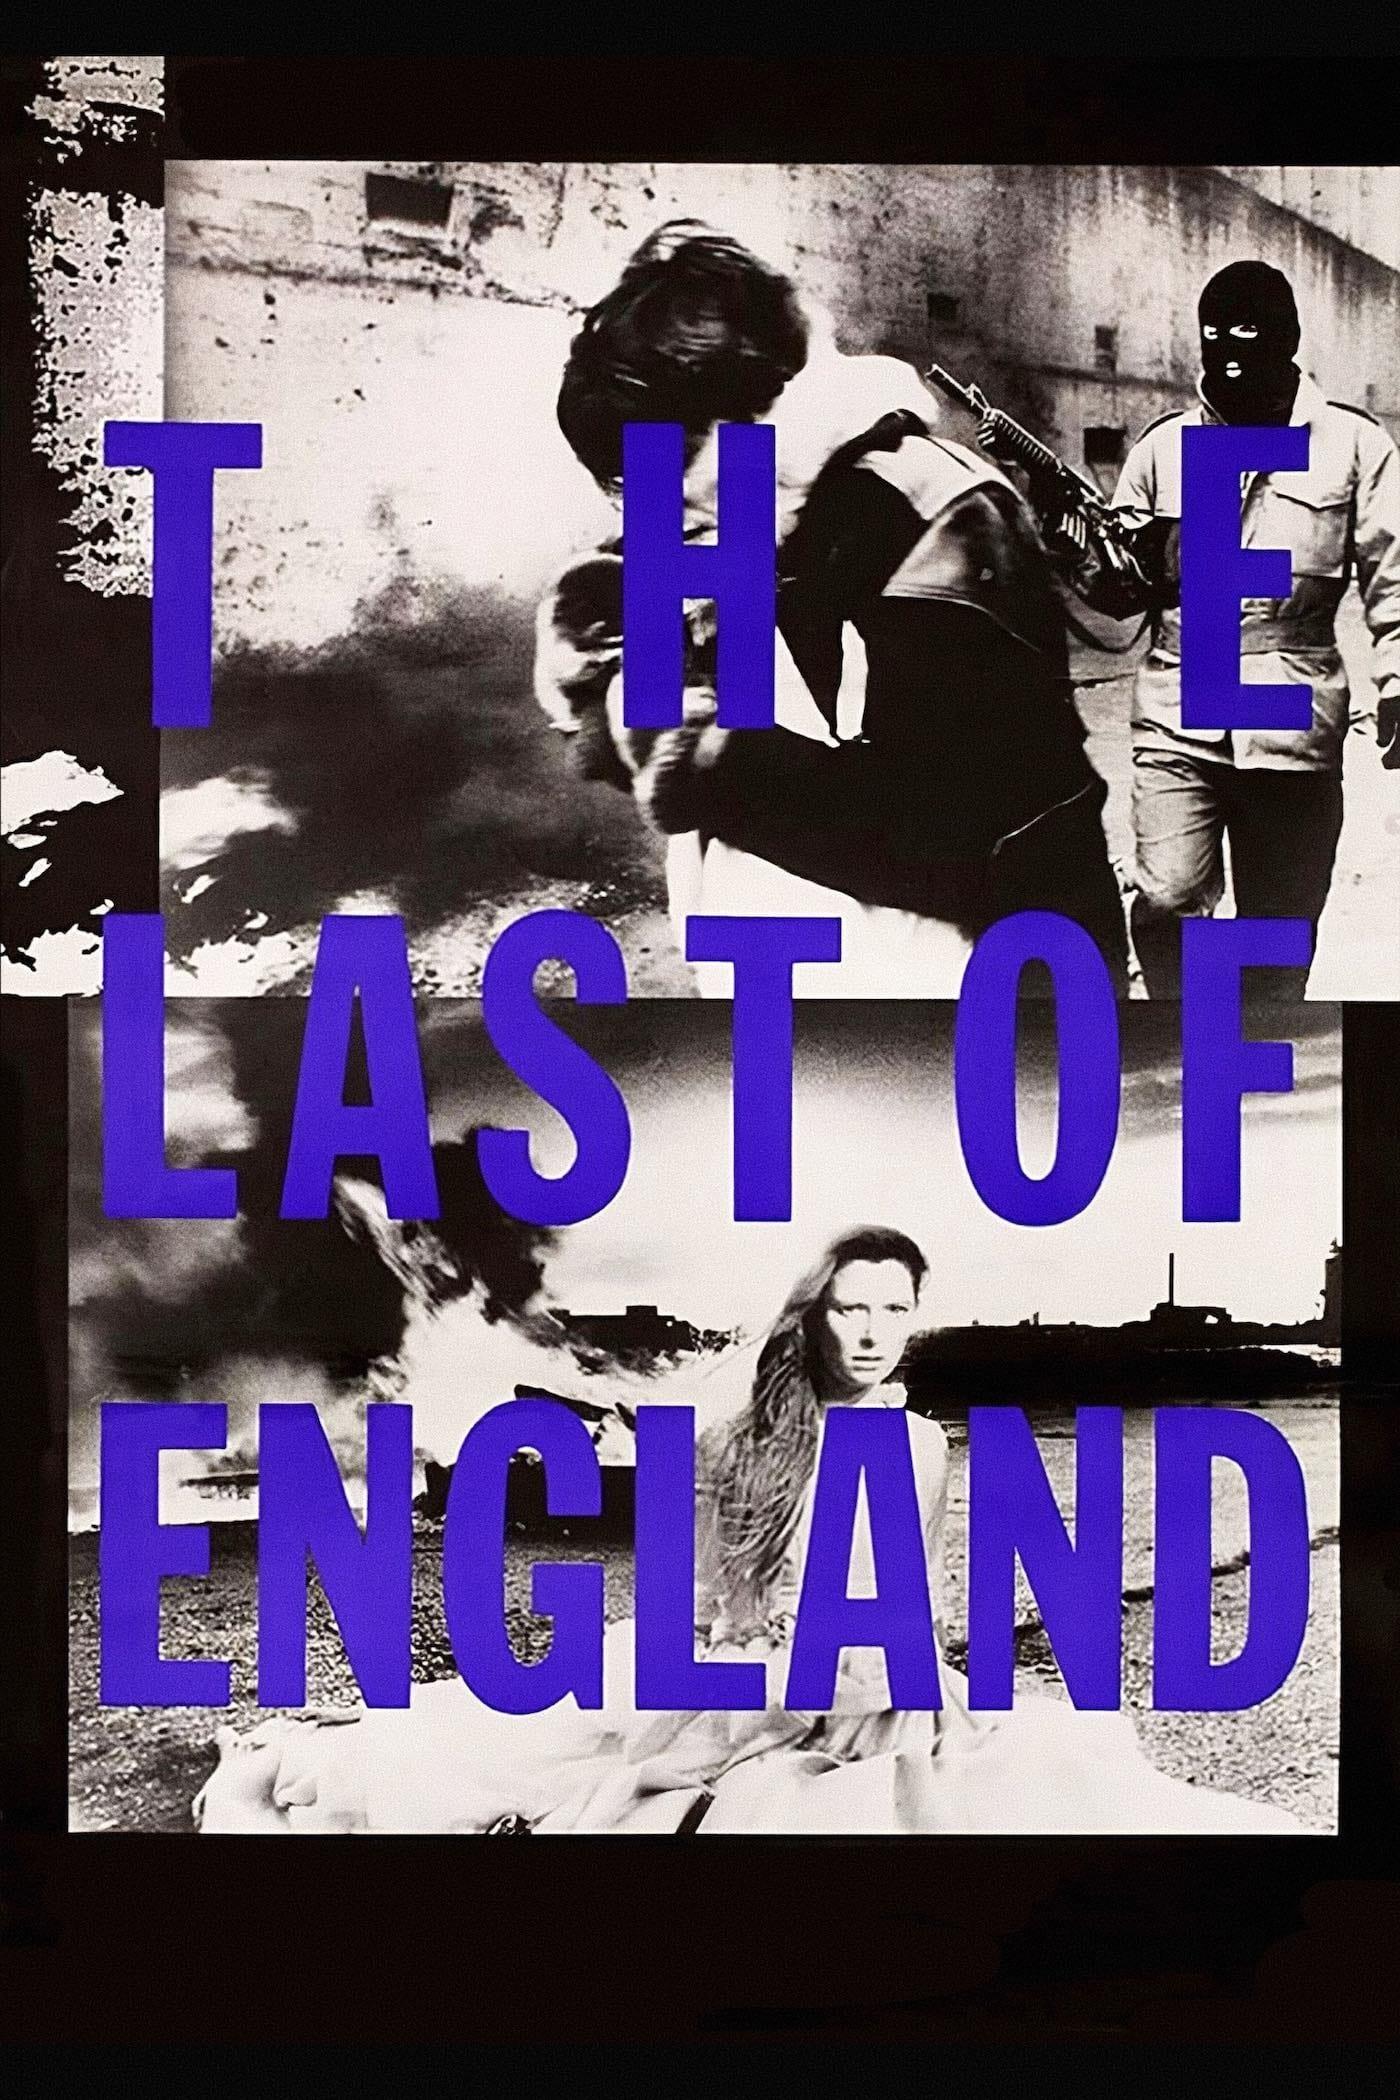 The Last of England poster